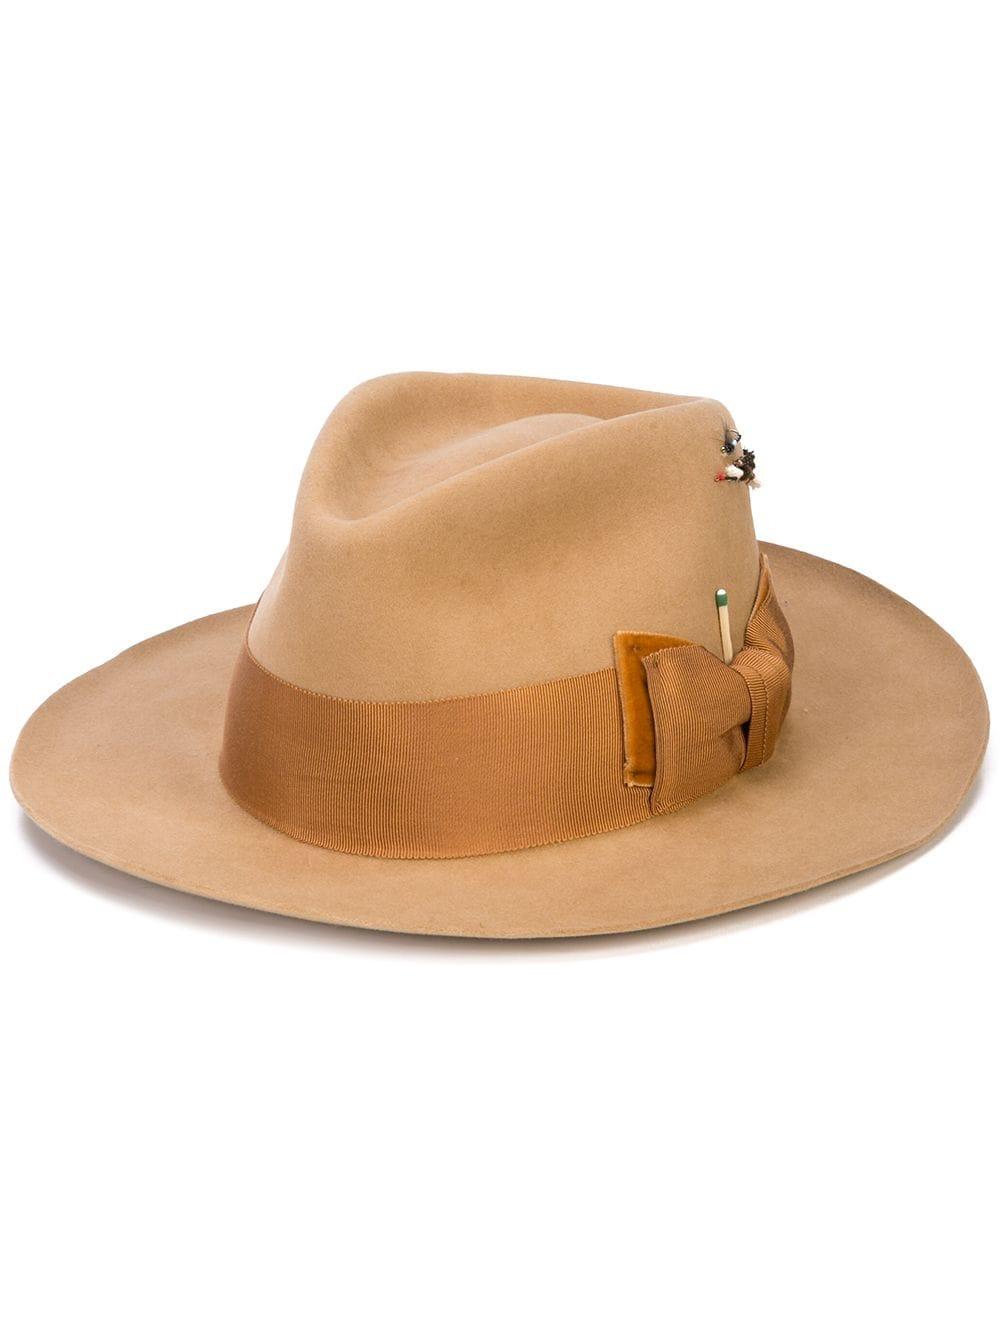 Nick Fouquet Bow Fedora Hat in Brown for Men - Lyst